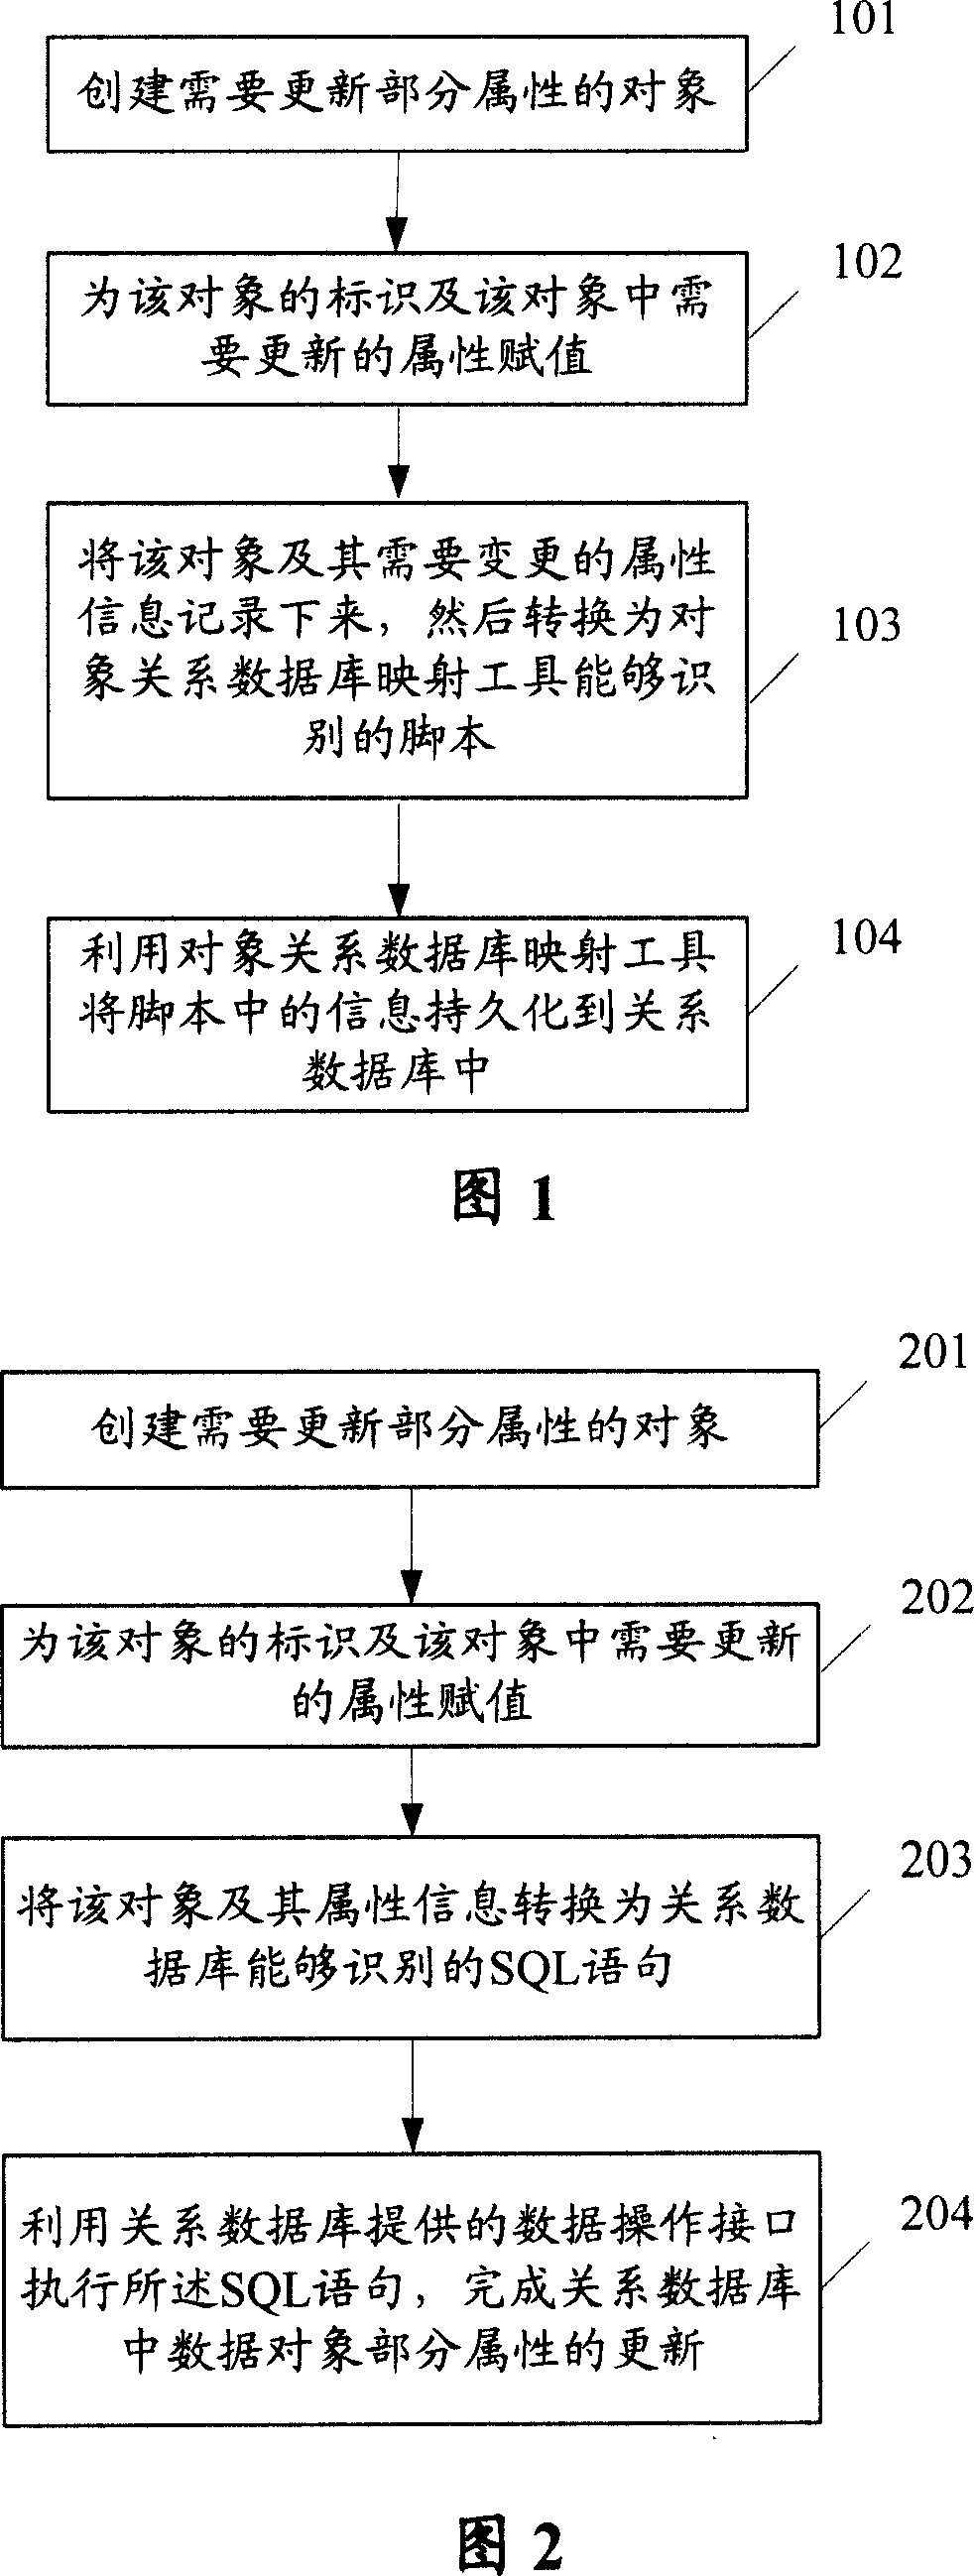 Method and apparatus for updating object local attribute to related data bank